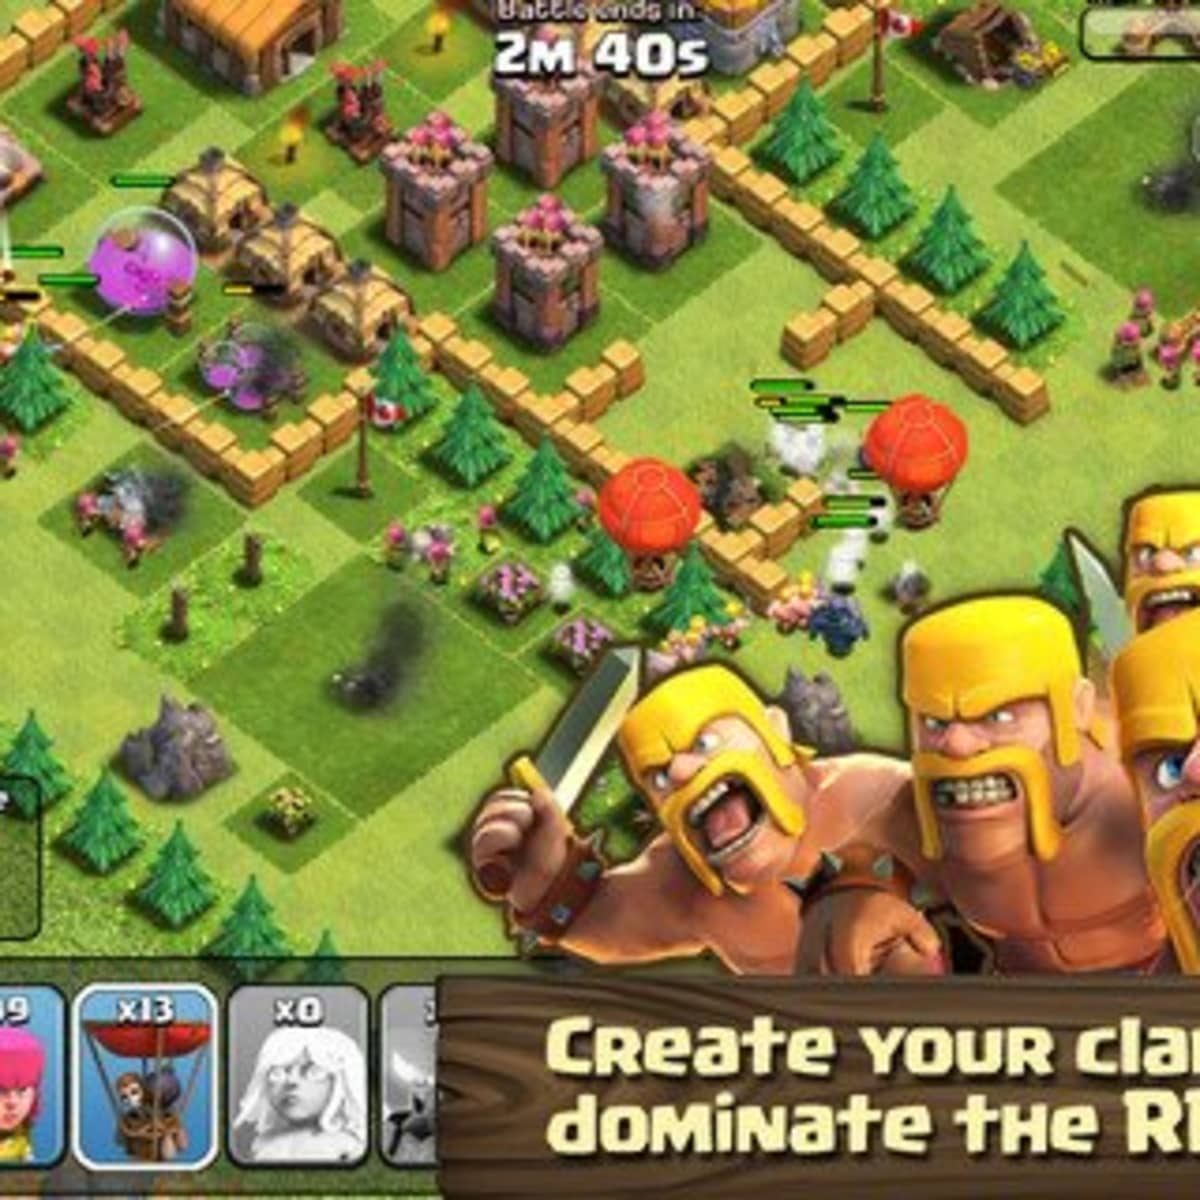 Clash of Clans comes to Google Play Games on PC